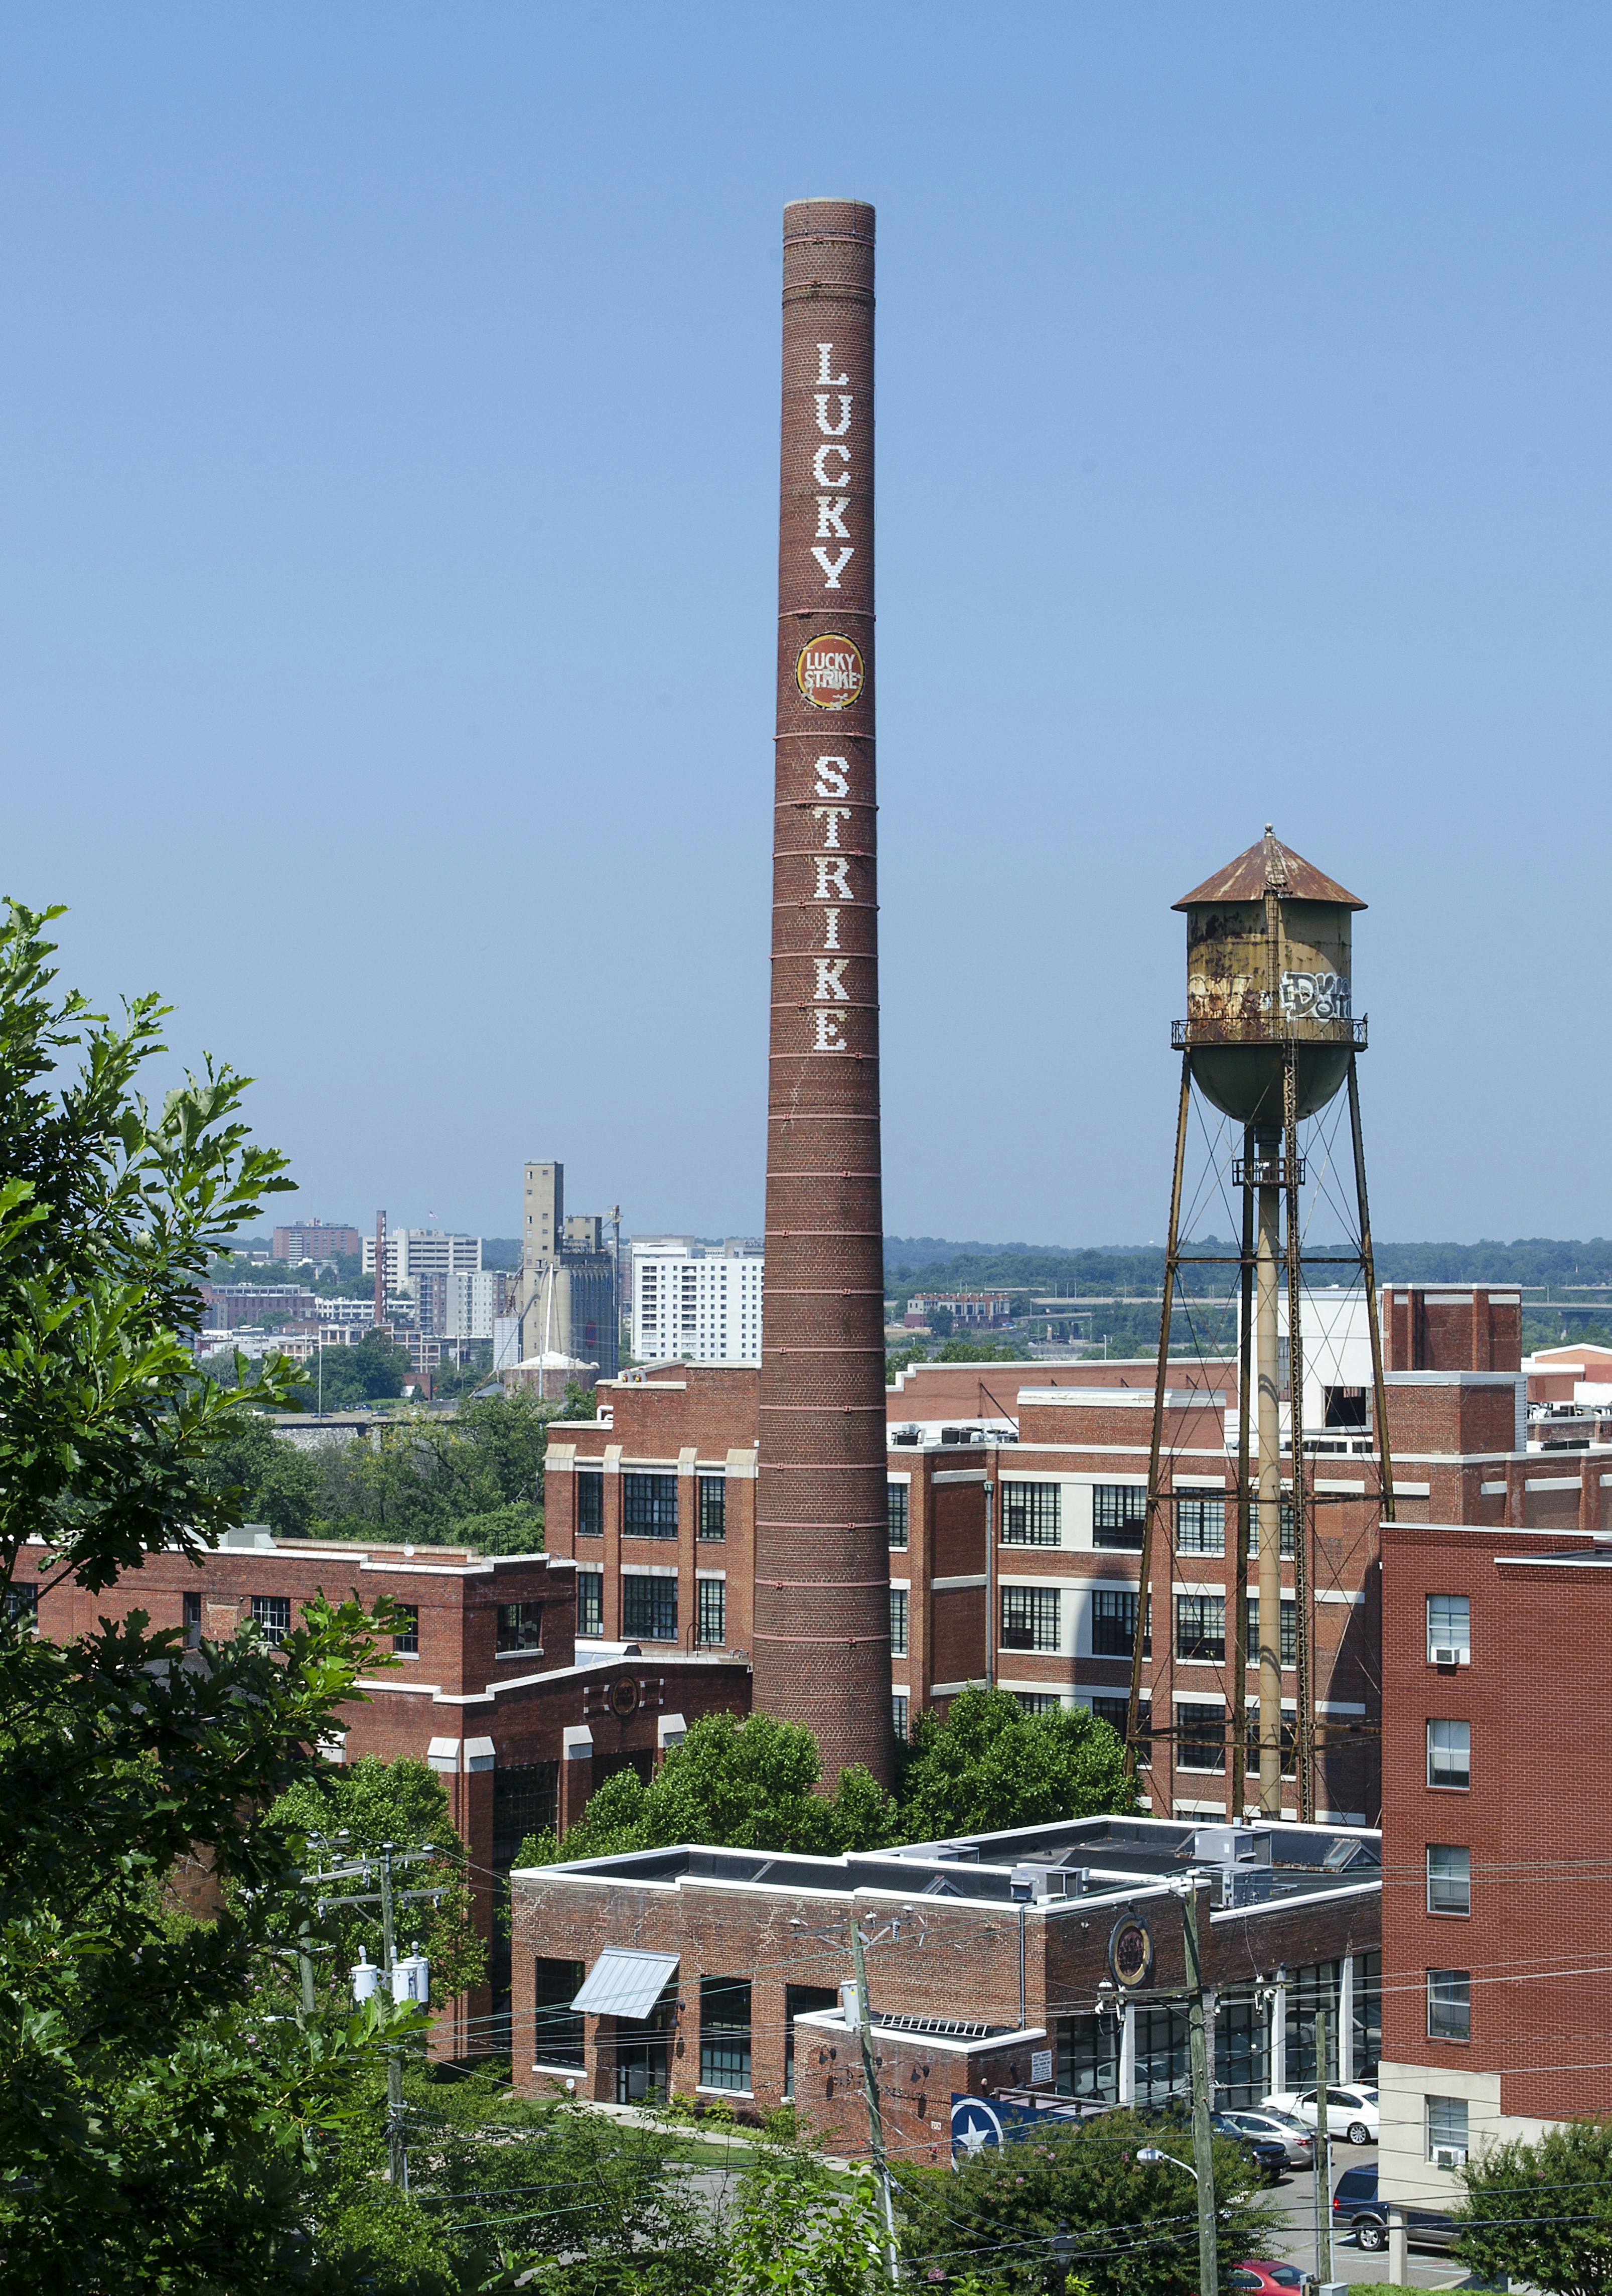 Discontinued Lucky Strikes cigarette factory in Richmond, Virginia remains a landmark atop Libby Park.